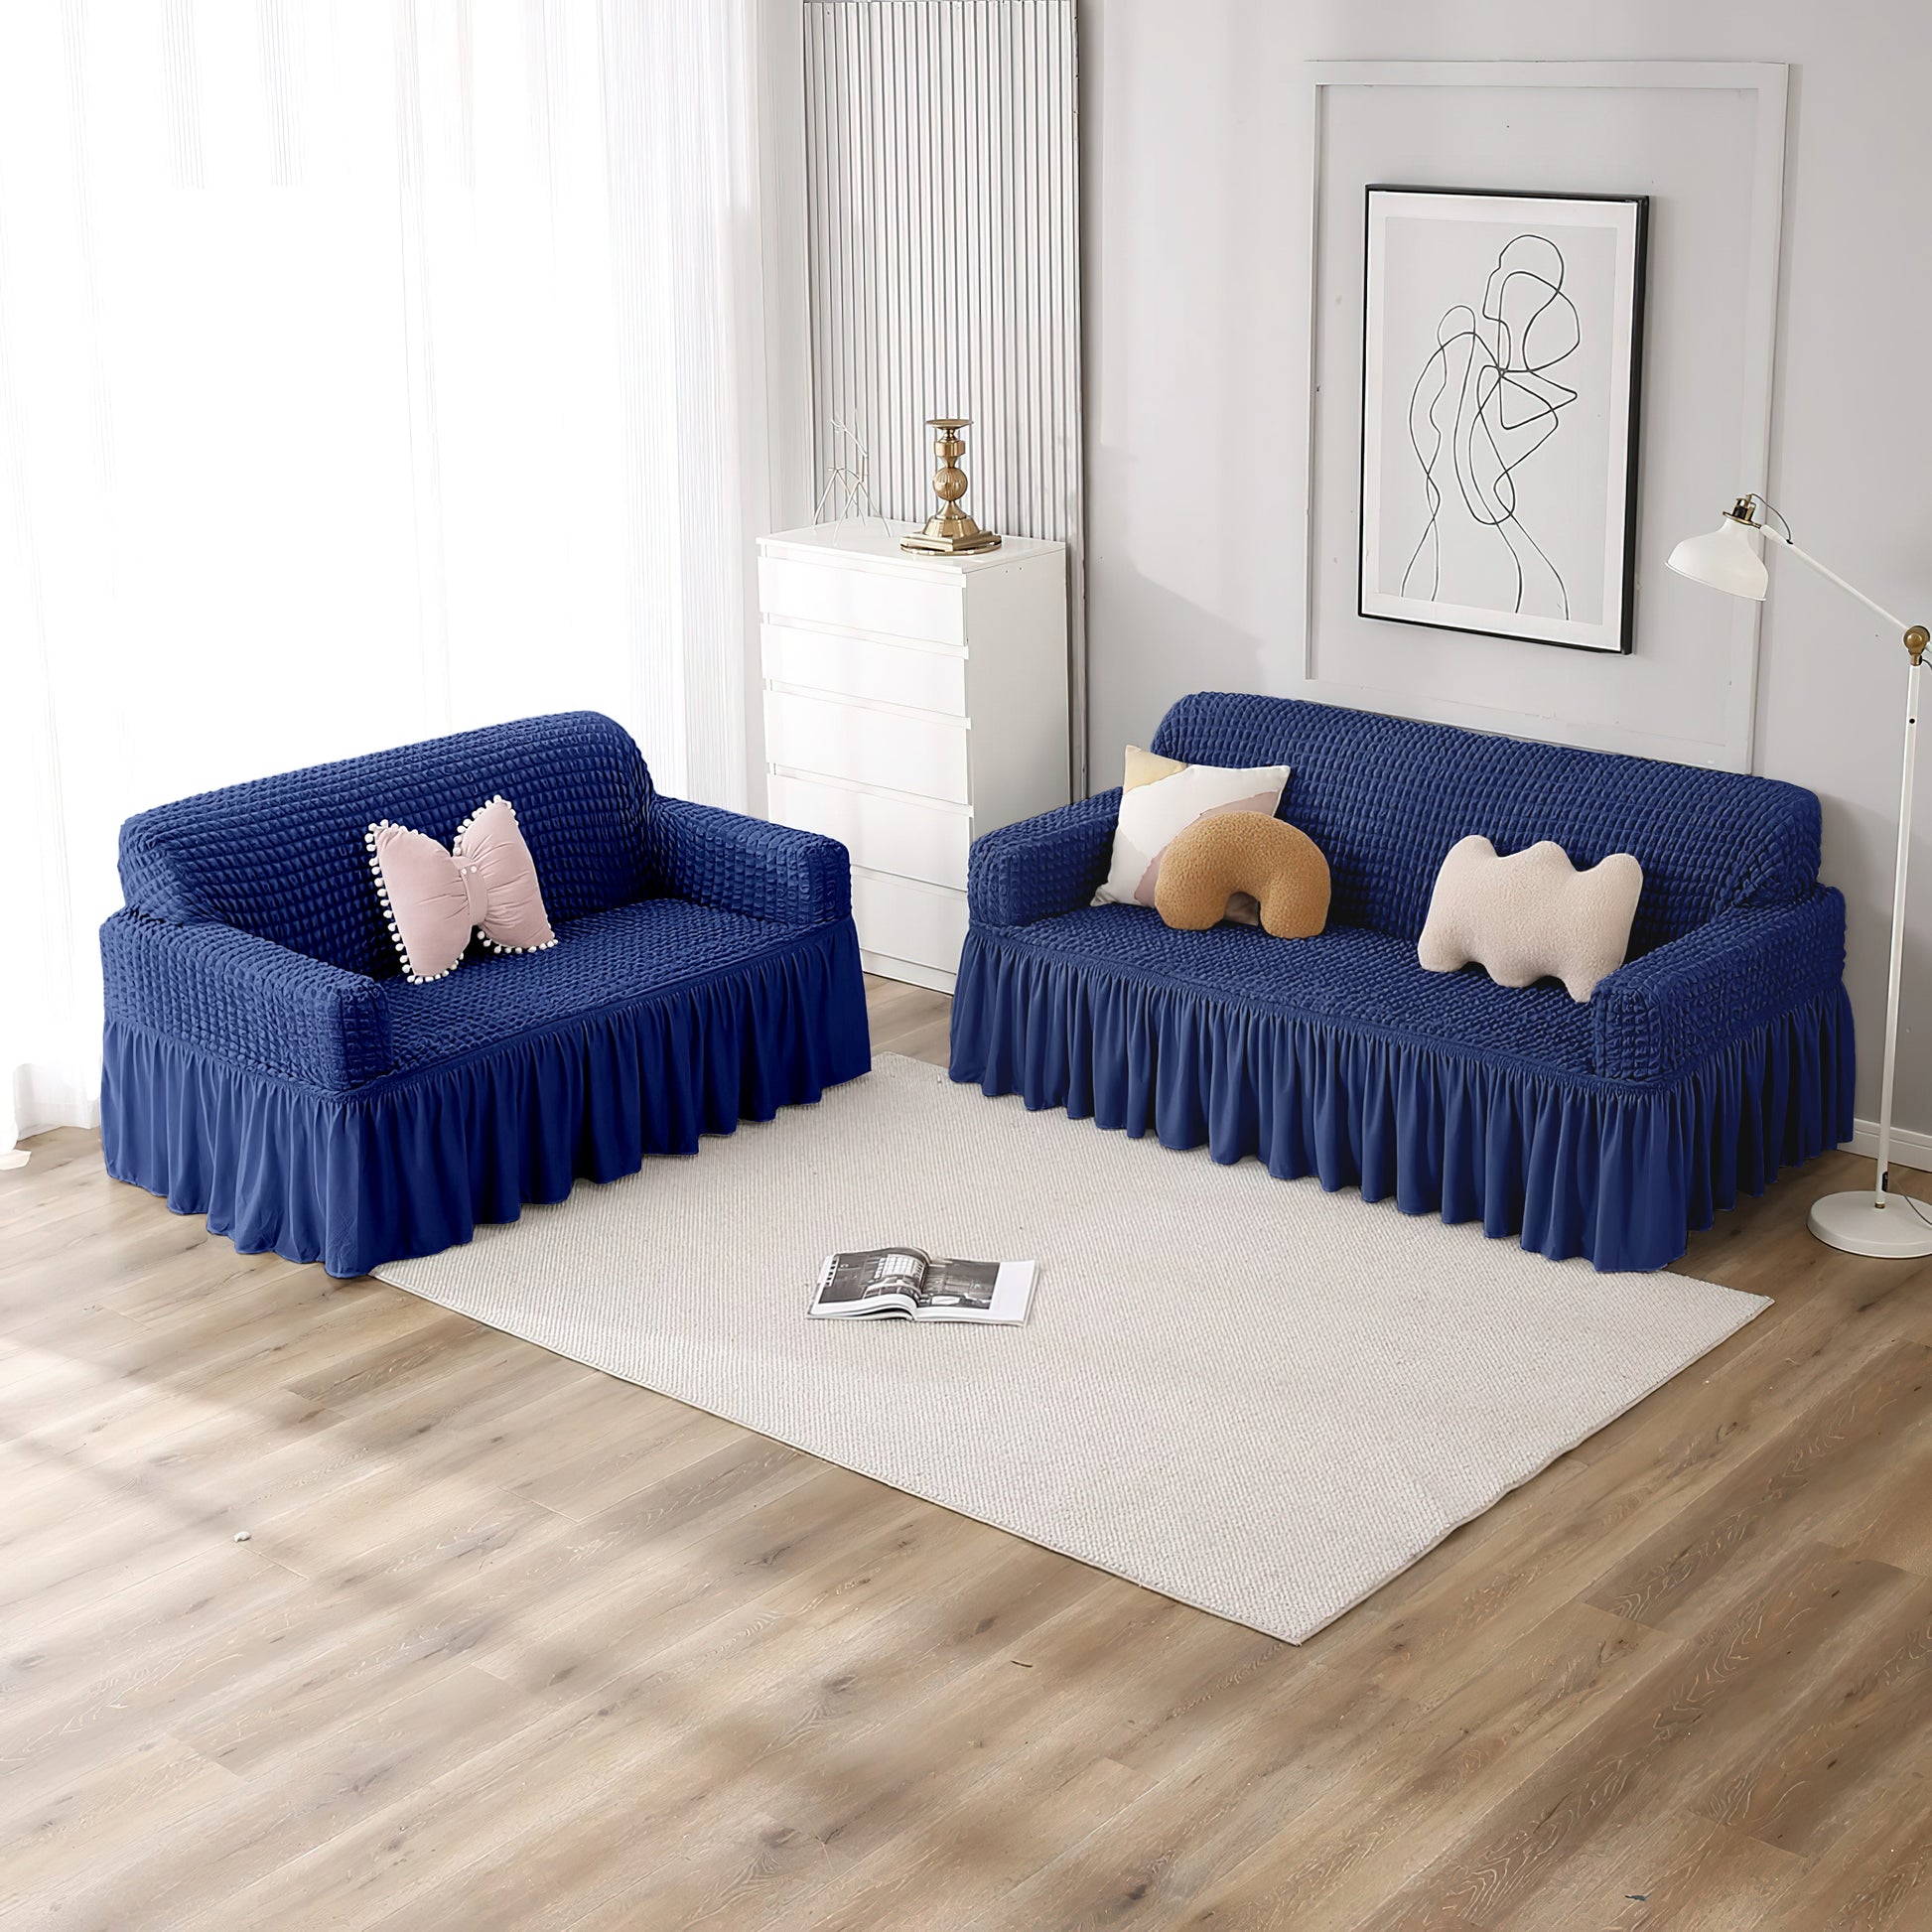 2 Seater Navy Blue